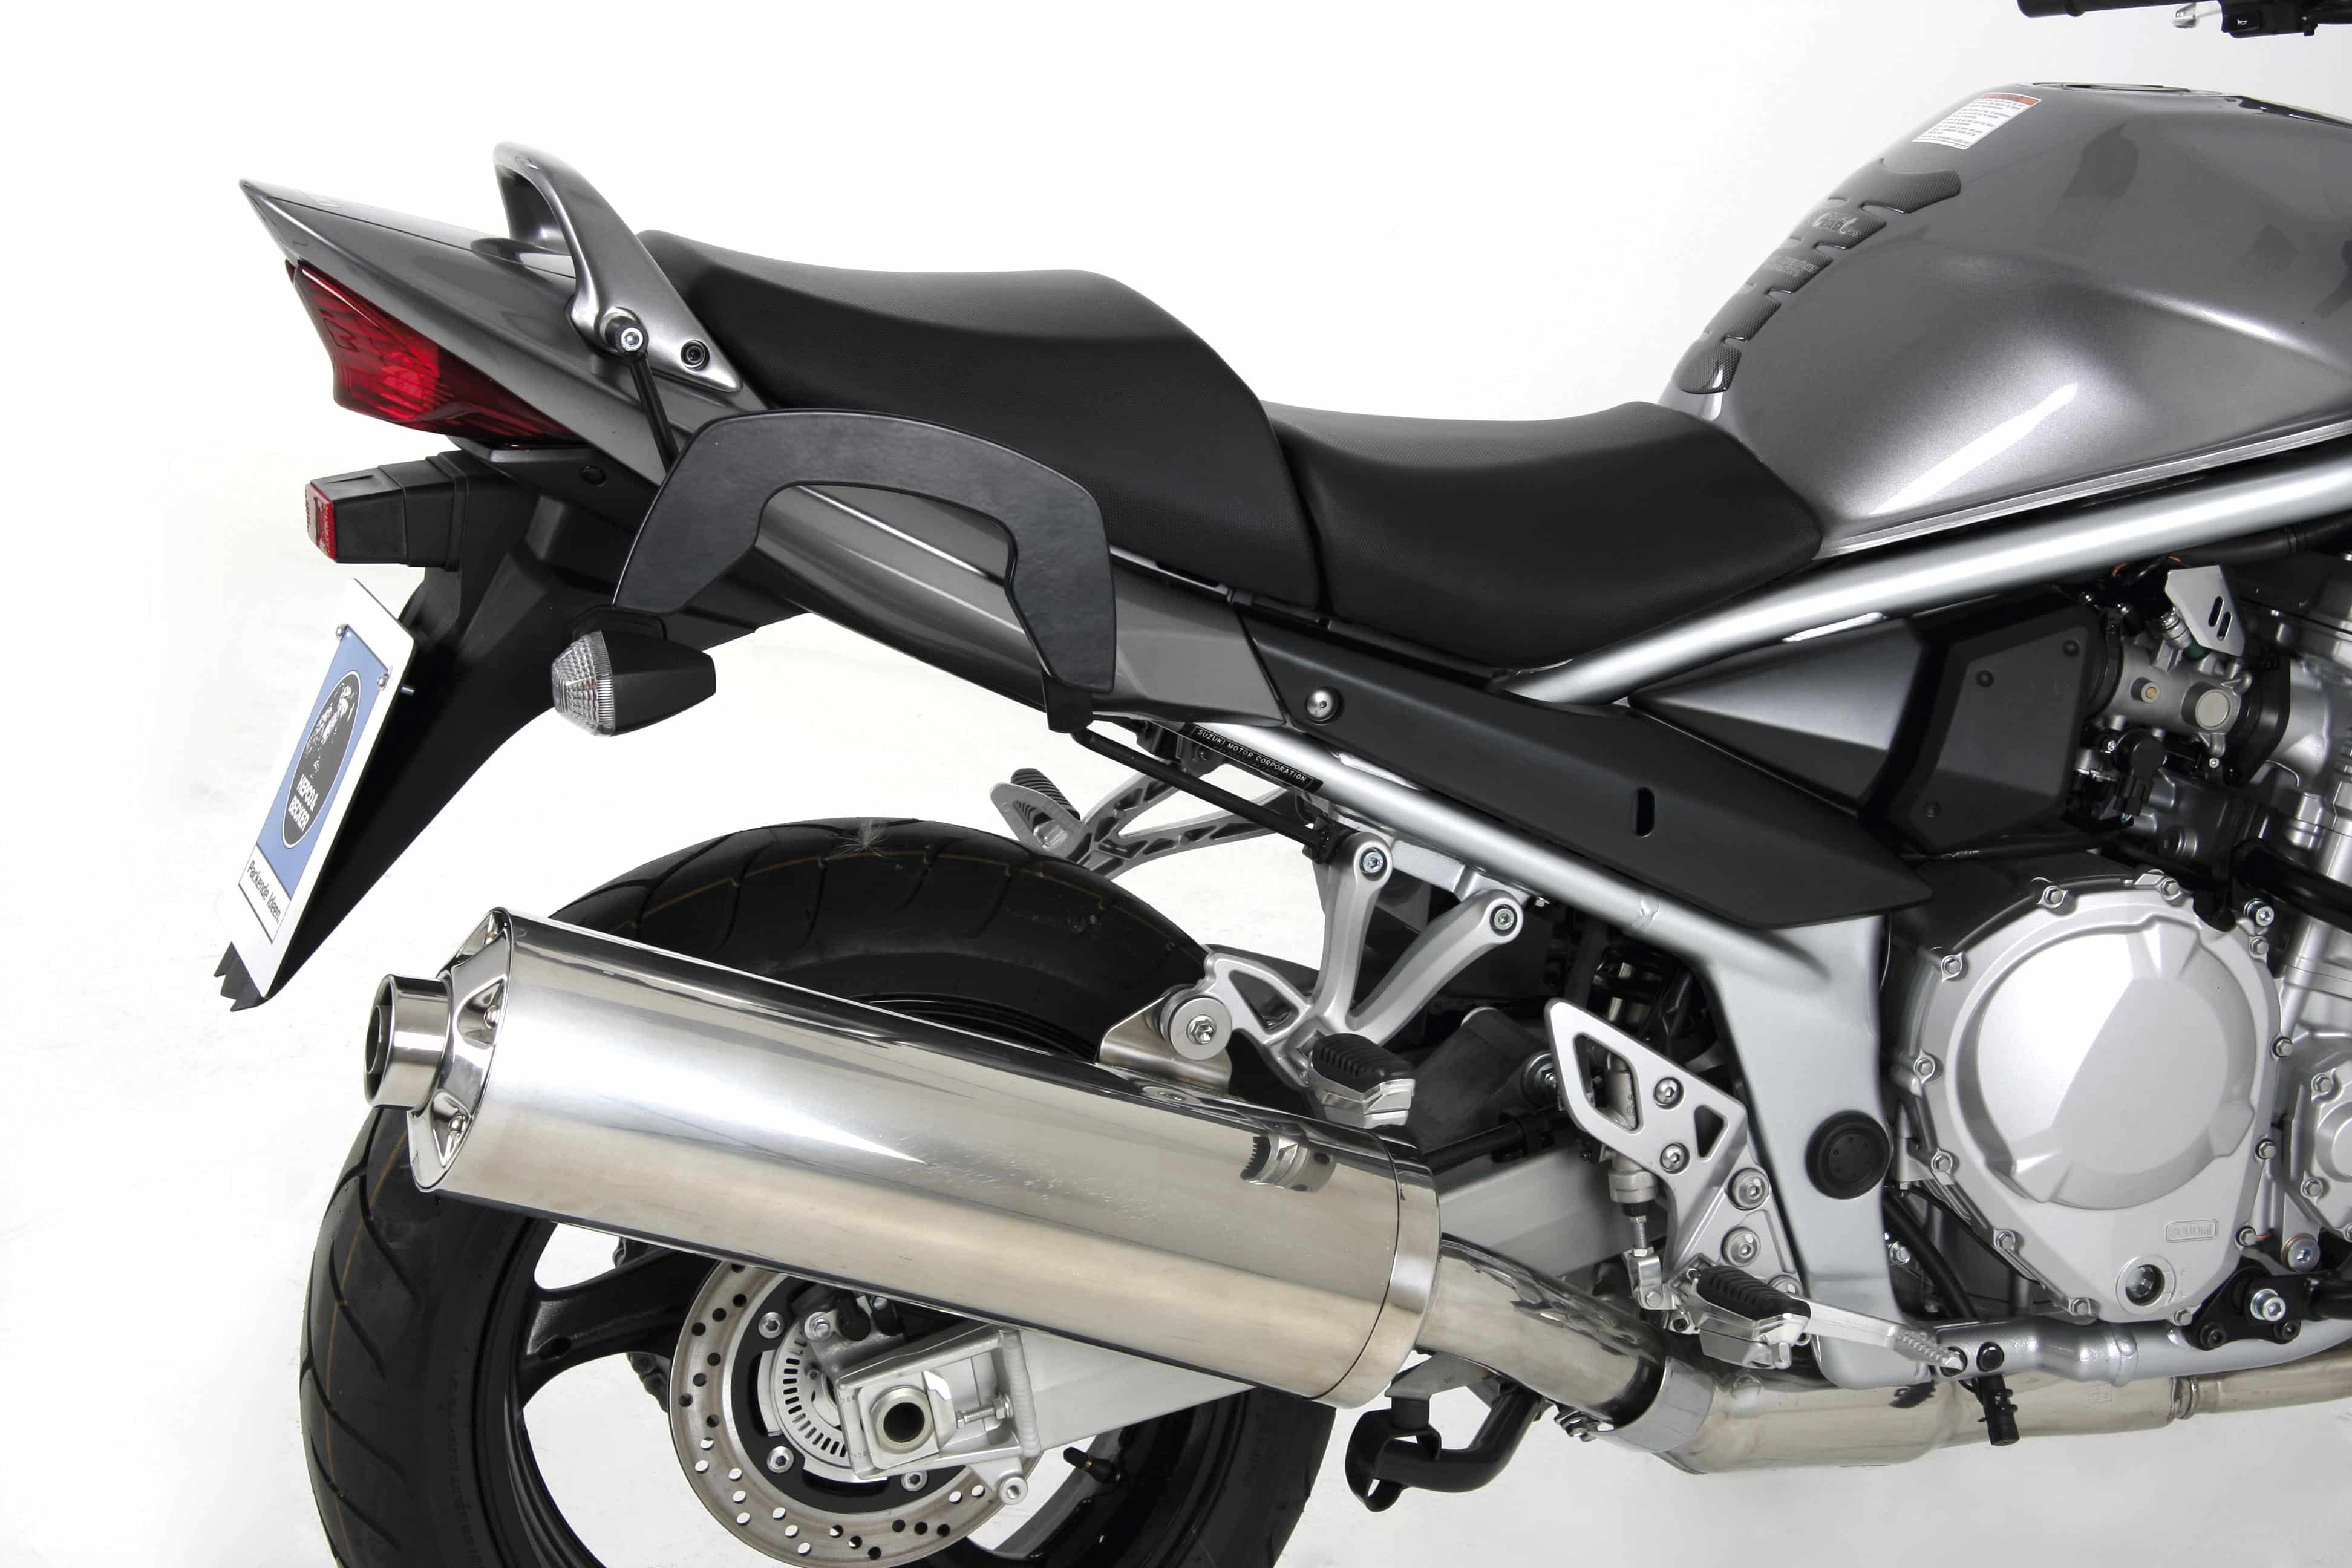 C-Bow sidecarrier for Suzuki GSF 650/1250/S (2007-2016)